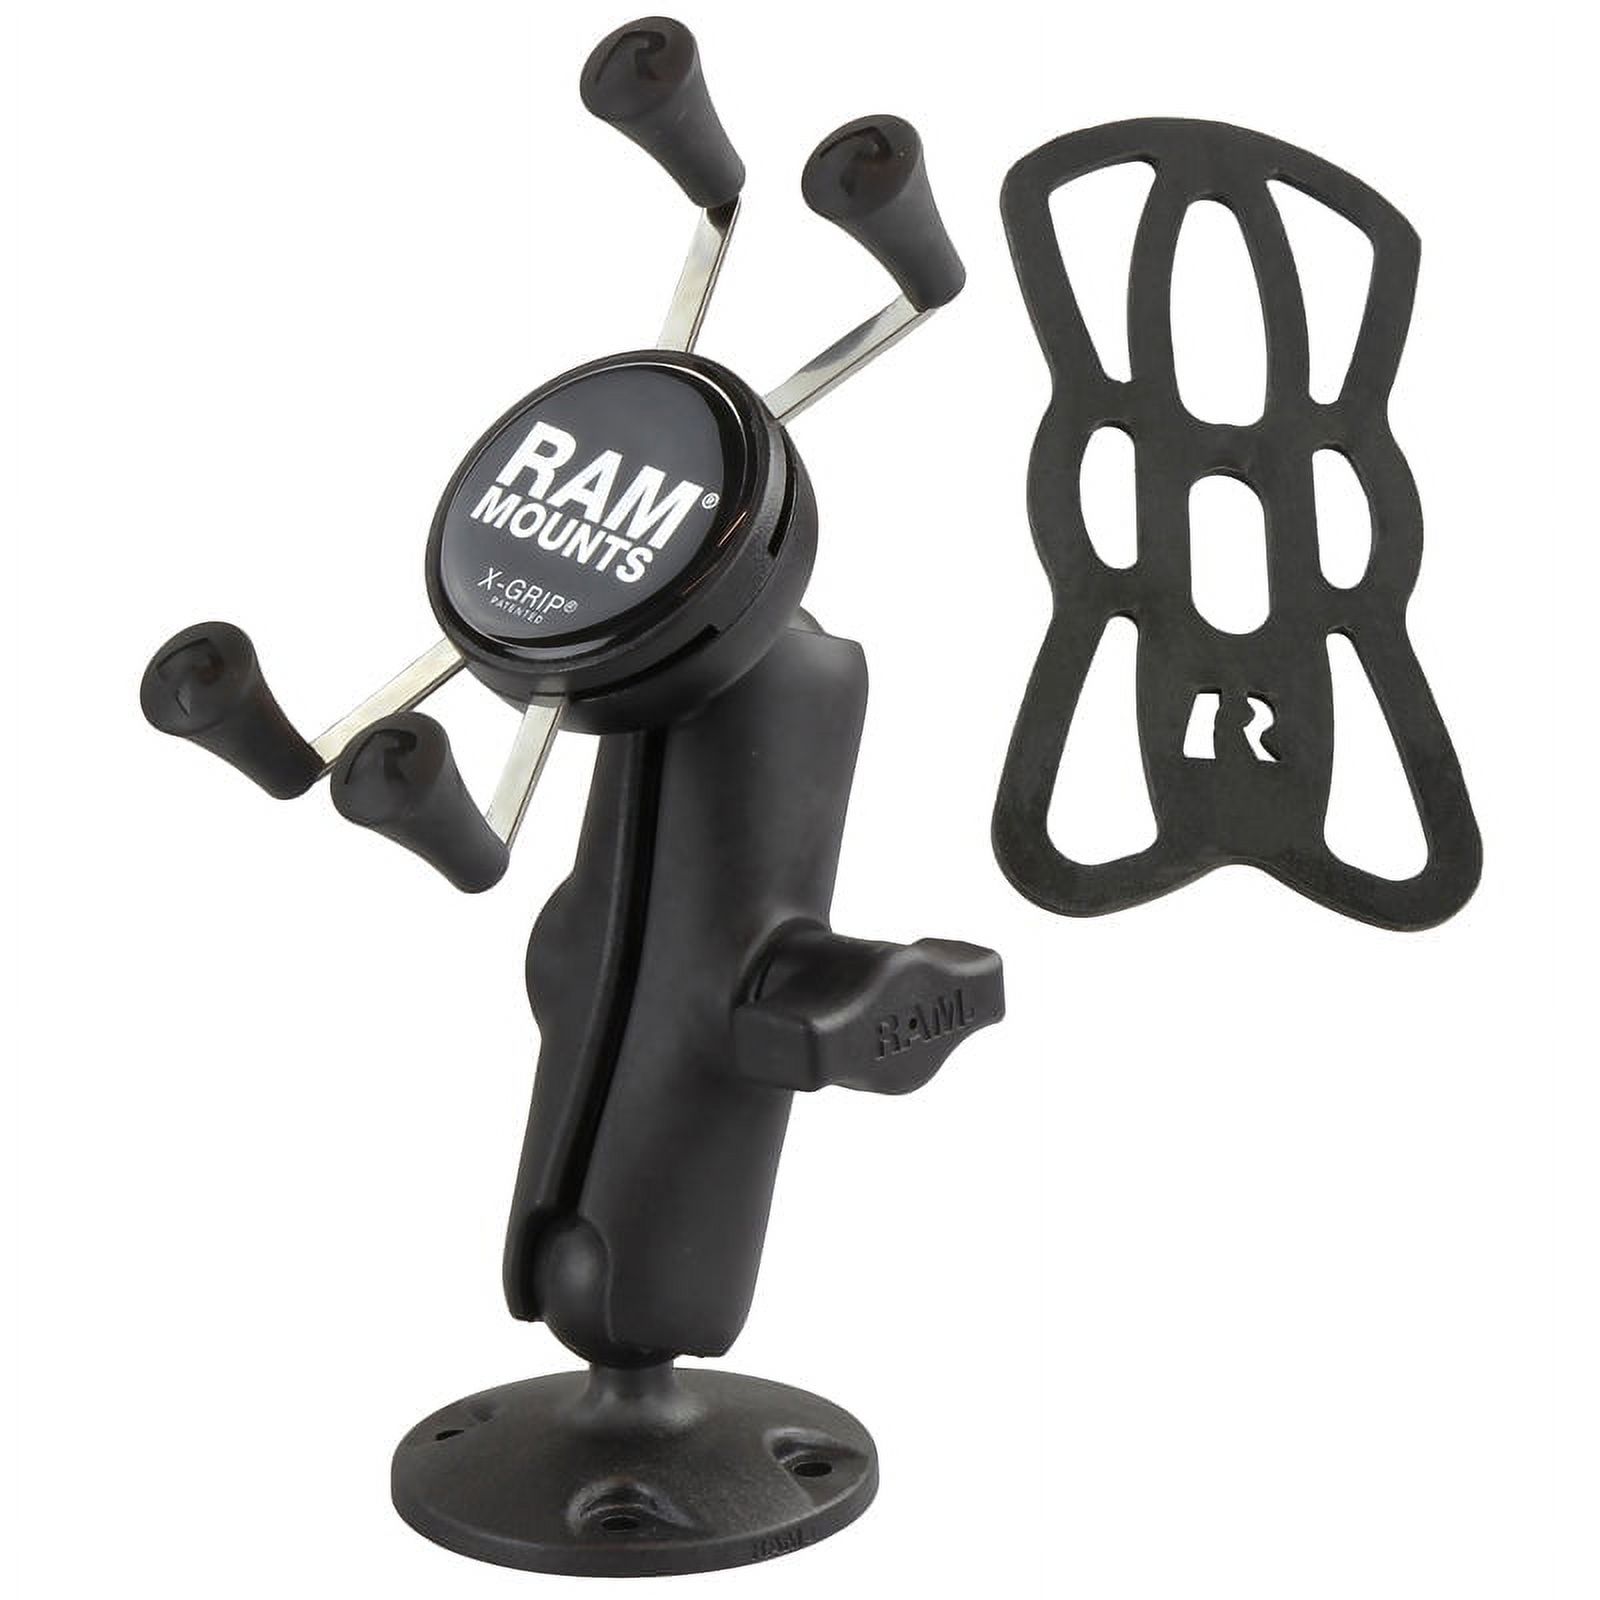 RAM Mounts X-Grip® High-Strength Composite Phone Mount with Drill-Down Base - image 5 of 5